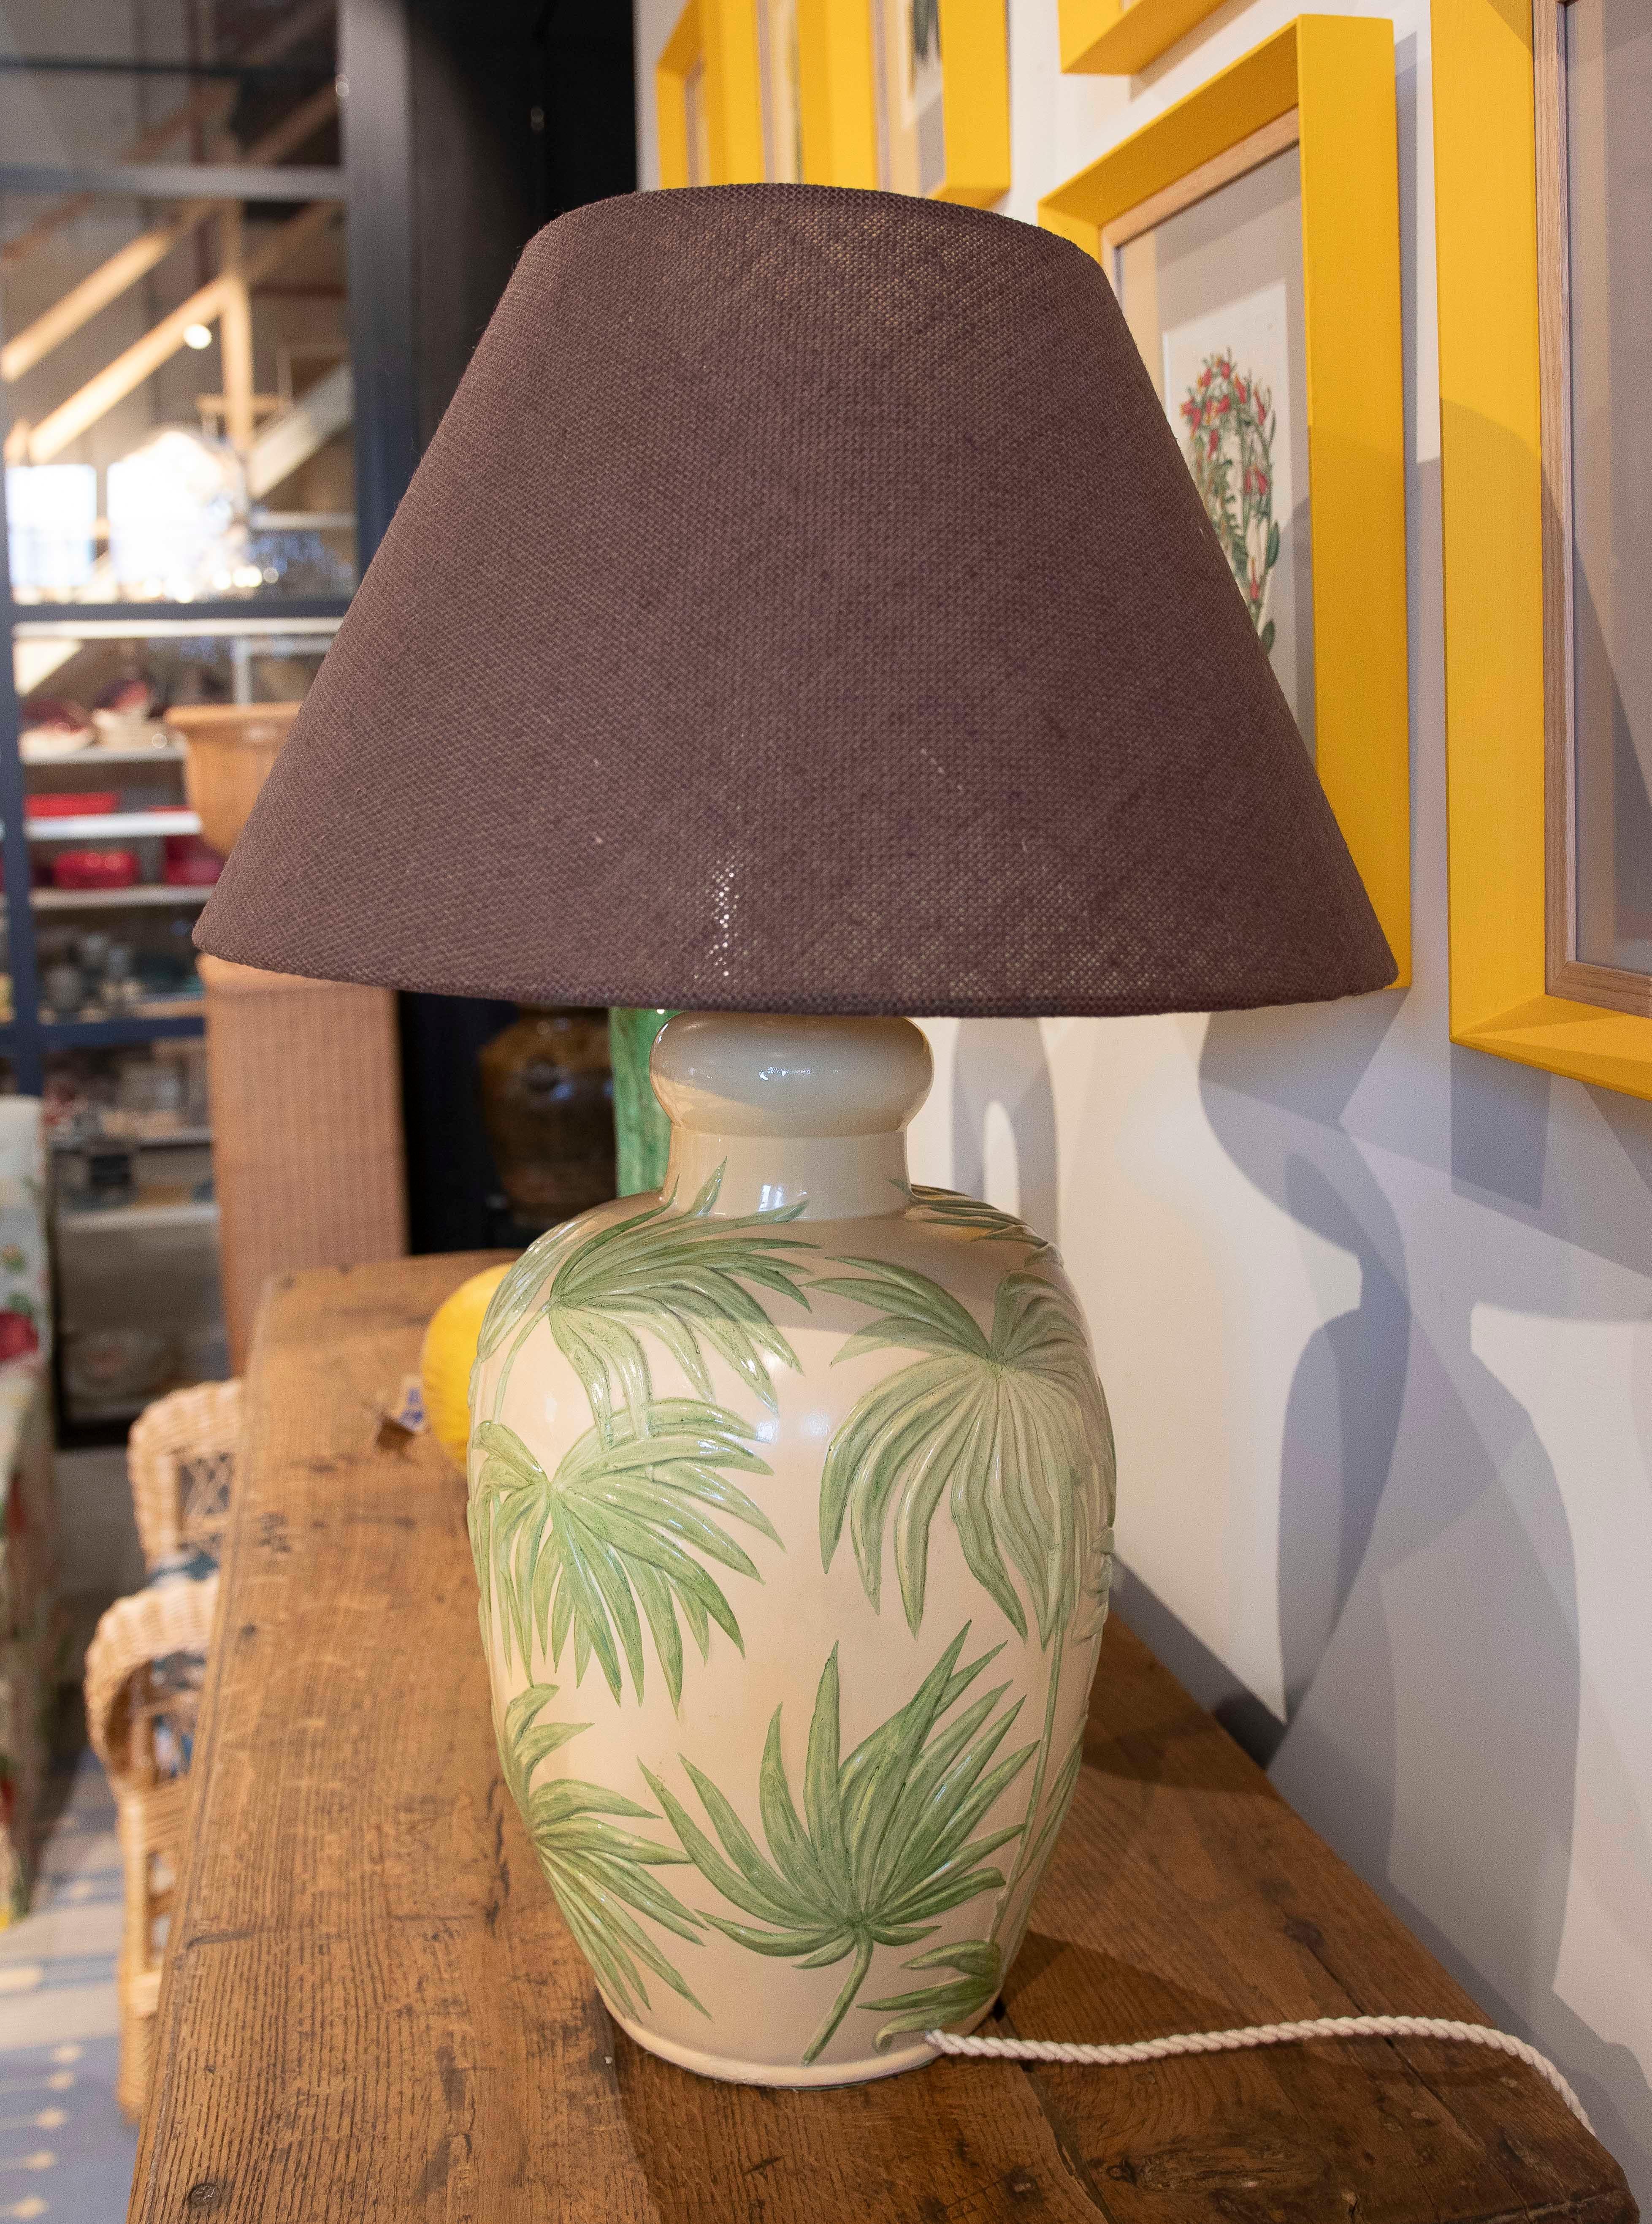 Spanish 1970s Ceramic Lamp with Palm Tree Decoration  For Sale